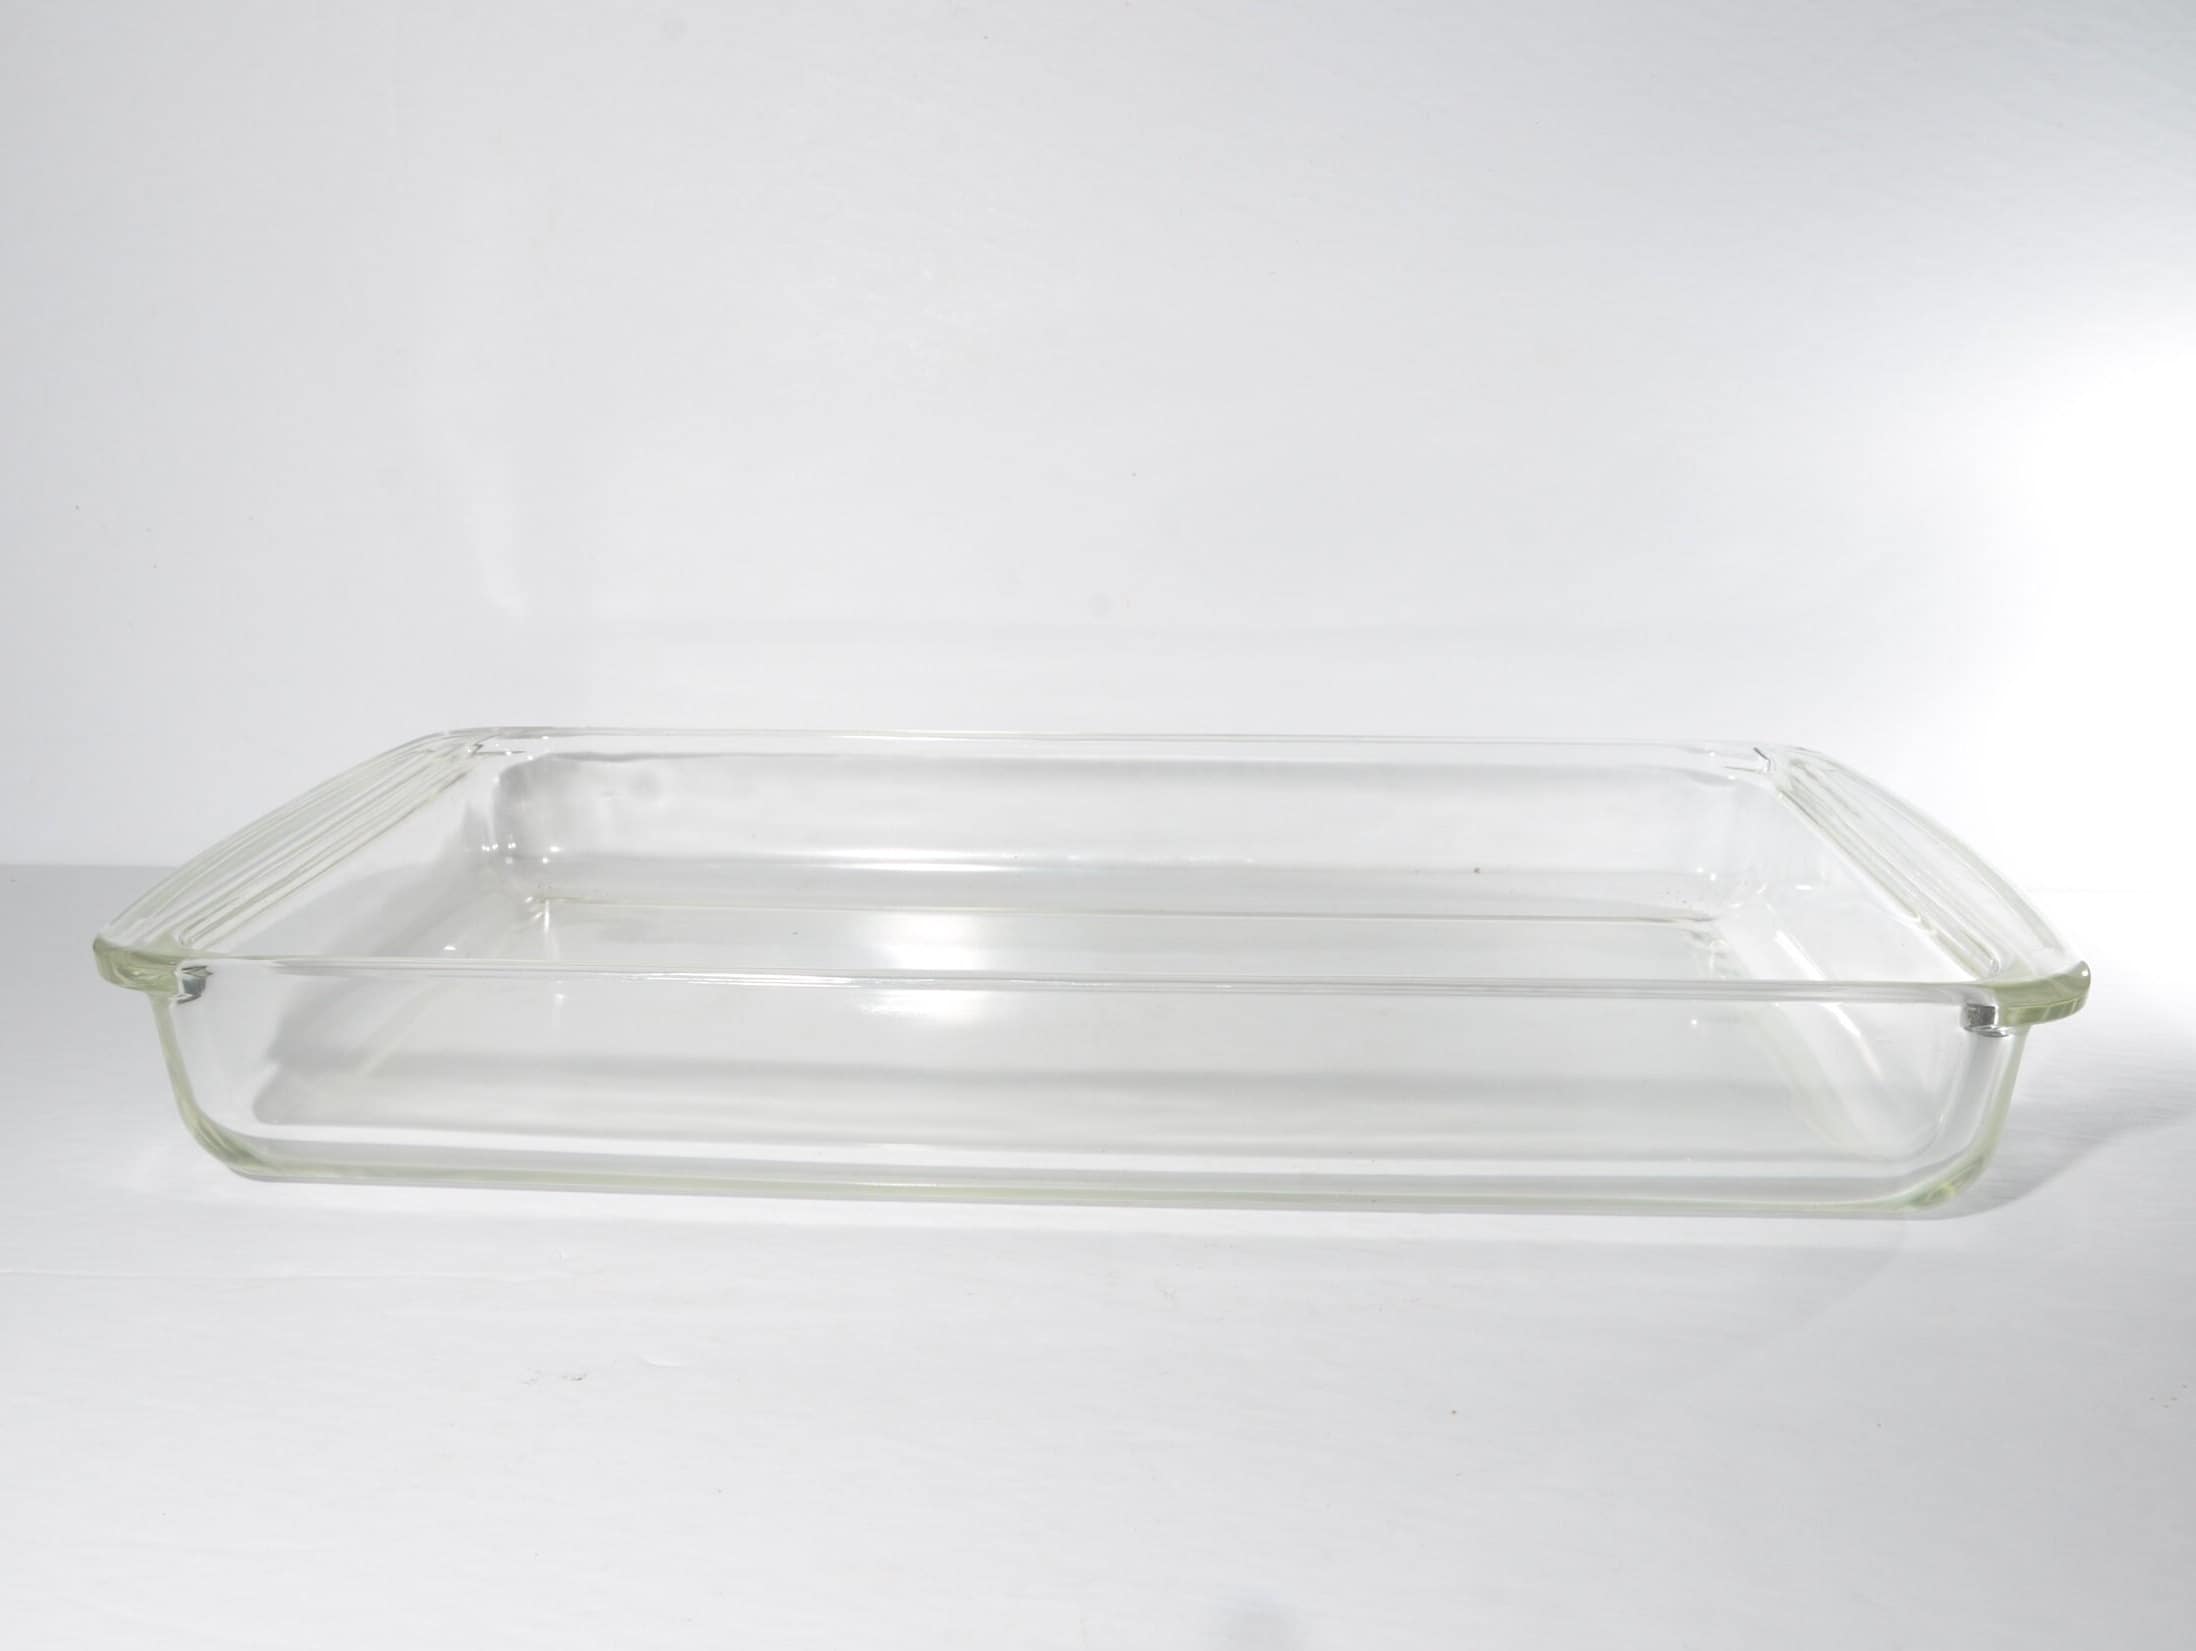 Pyrex 233 Rectangular Clear Glass Casserole Baking Dish and 233-pc Red Plastic Lid (2-Pack)